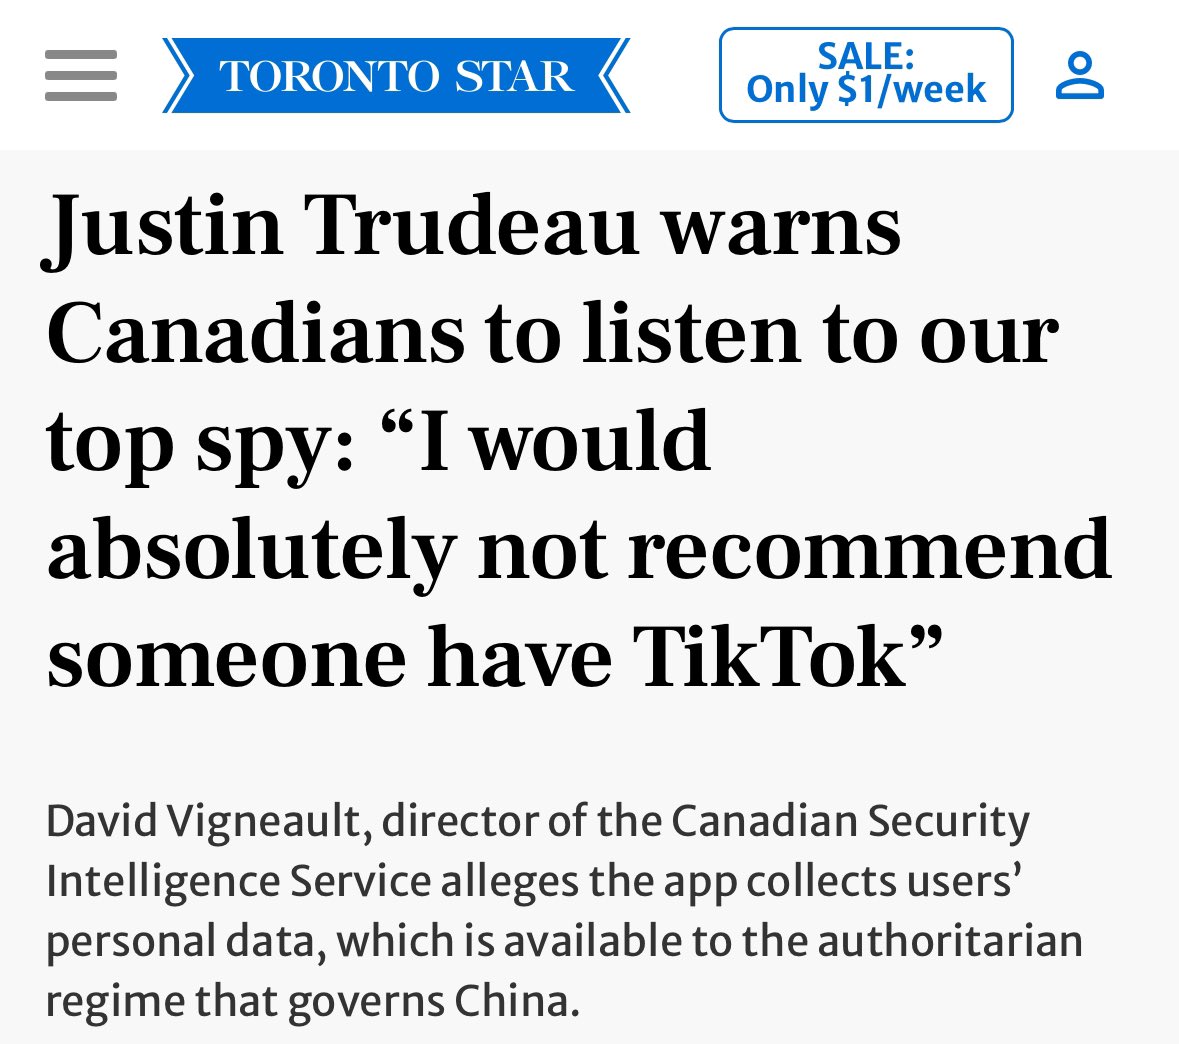 🇨🇦What’s worse TikTok or ArriveCan?🤔 Interesting timing since like X there are many negative videos on Trudeau? I wonder if they were positive videos whether he would say a word?